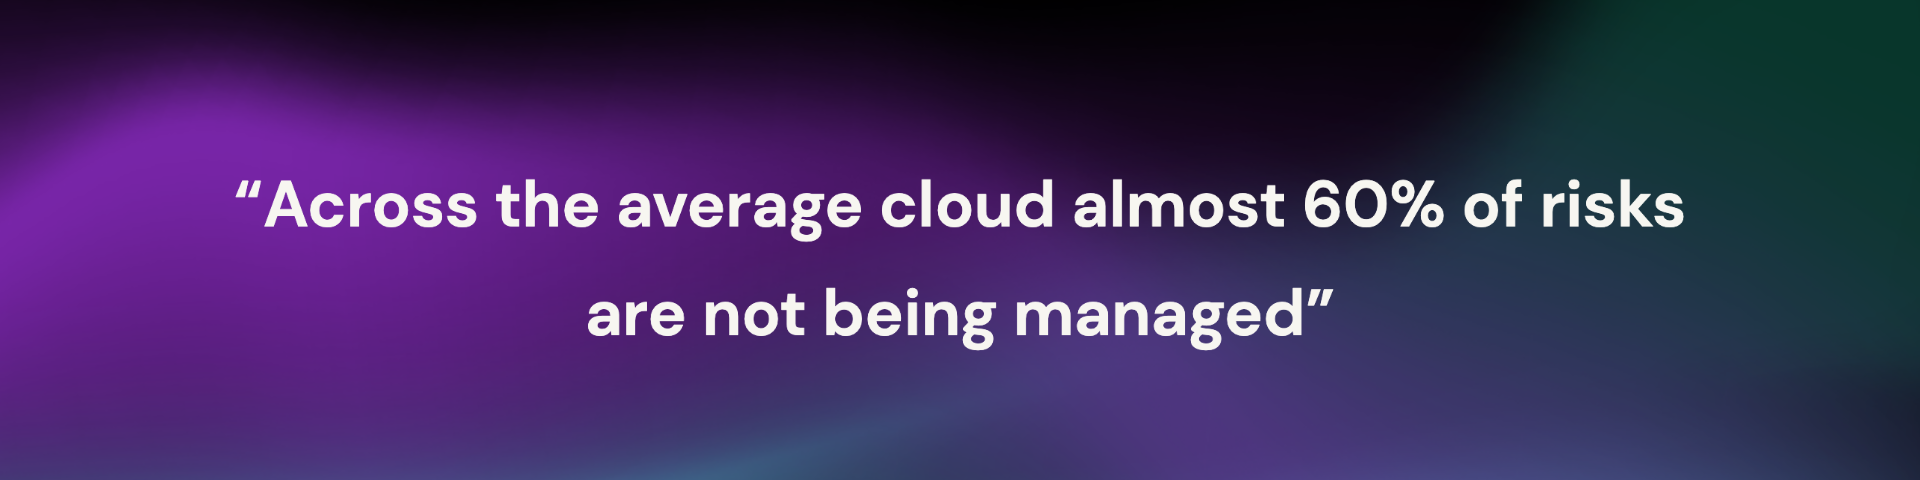 across the average cloud 60% risks not addressed